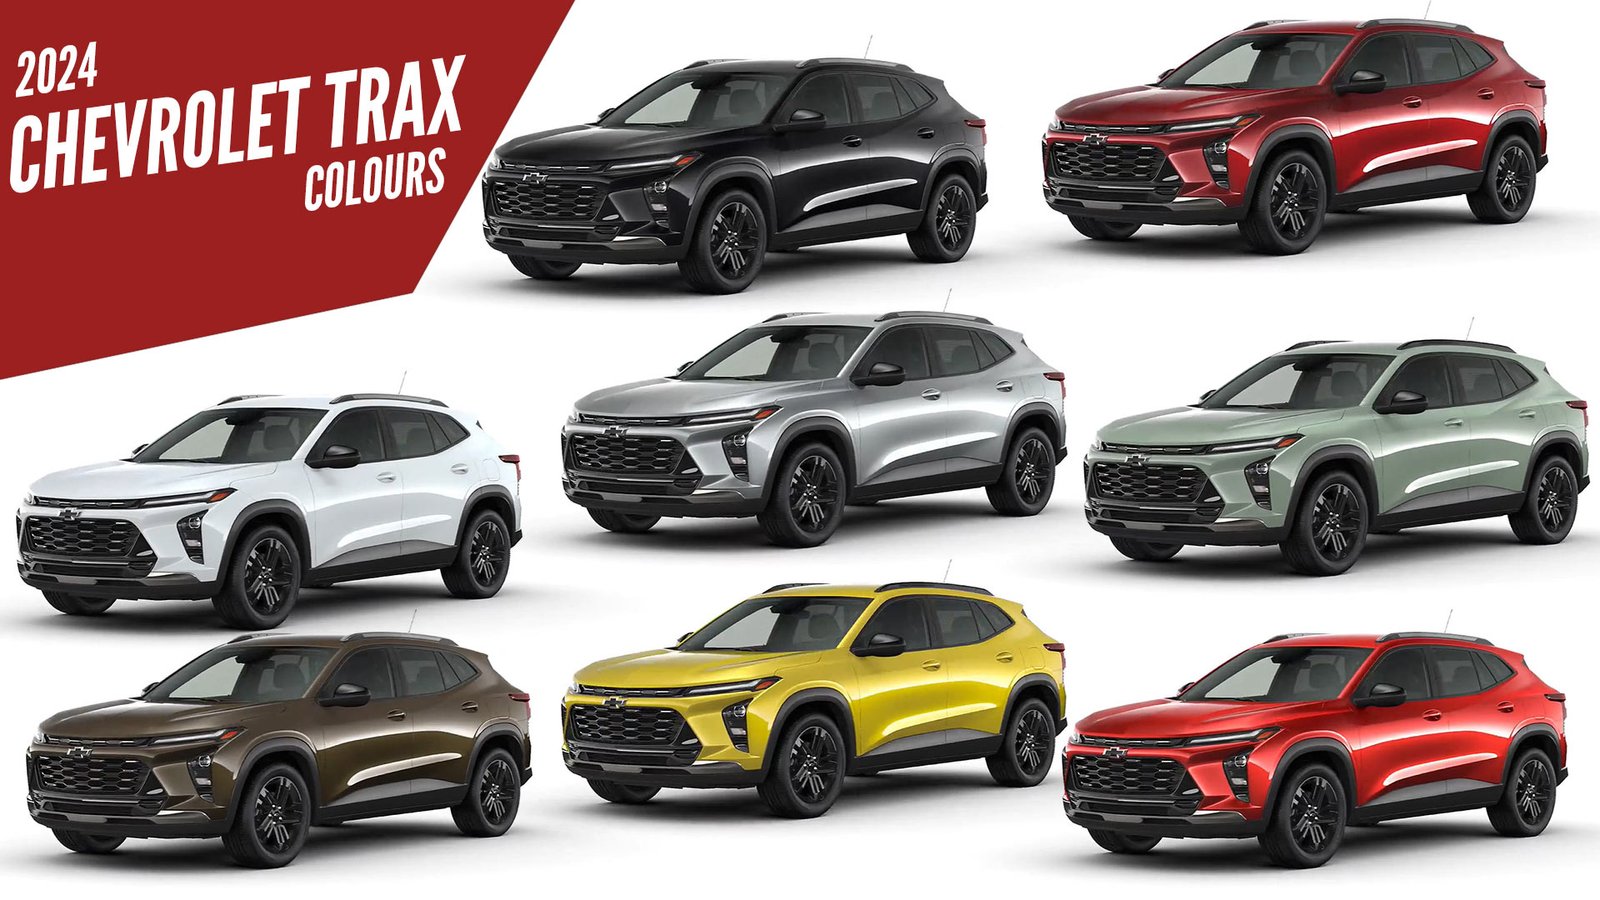 2024 Chevrolet Trax All Colors 